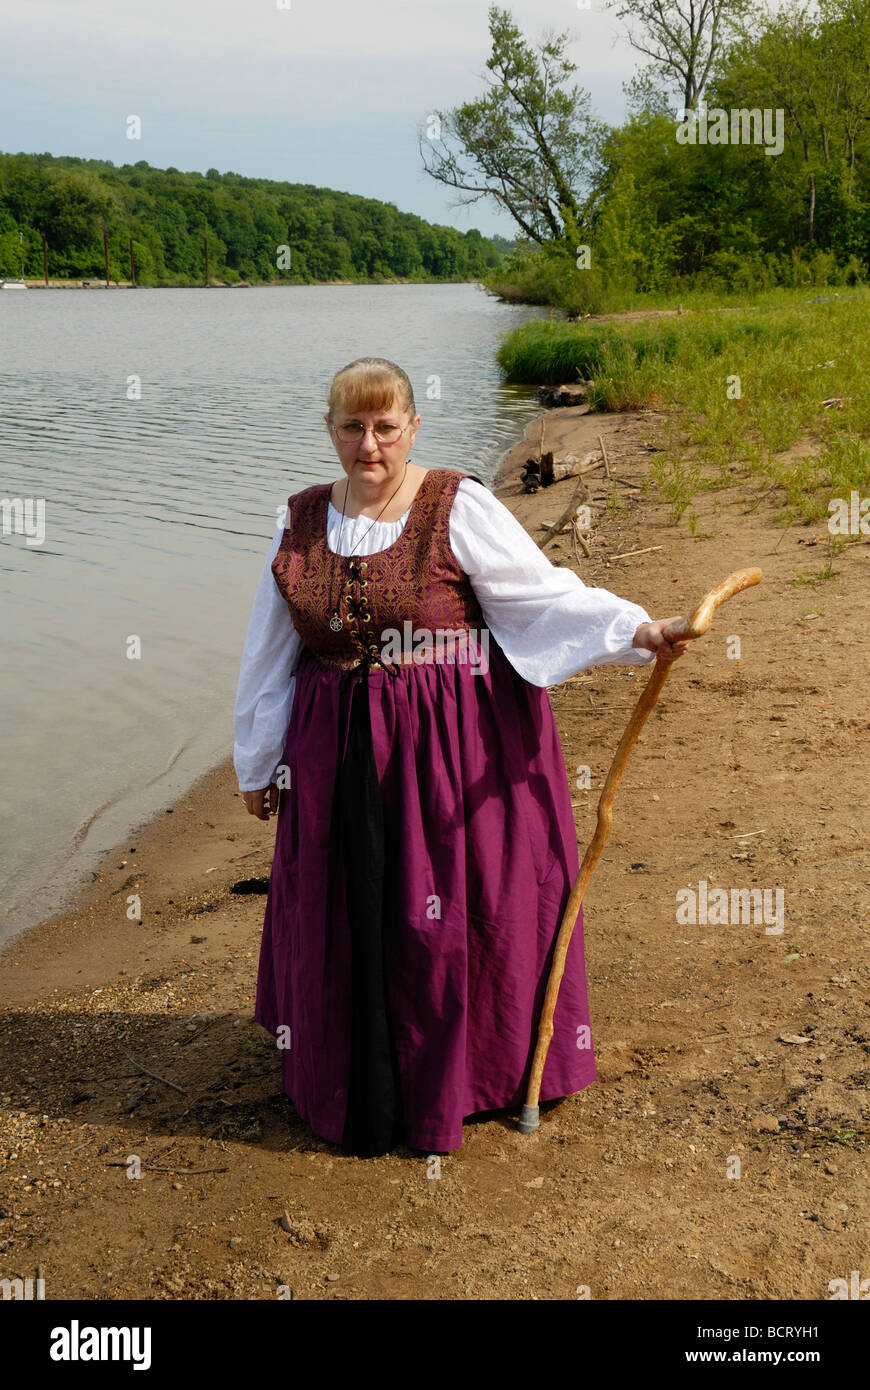 Woman by lake in period dress Stock Photo